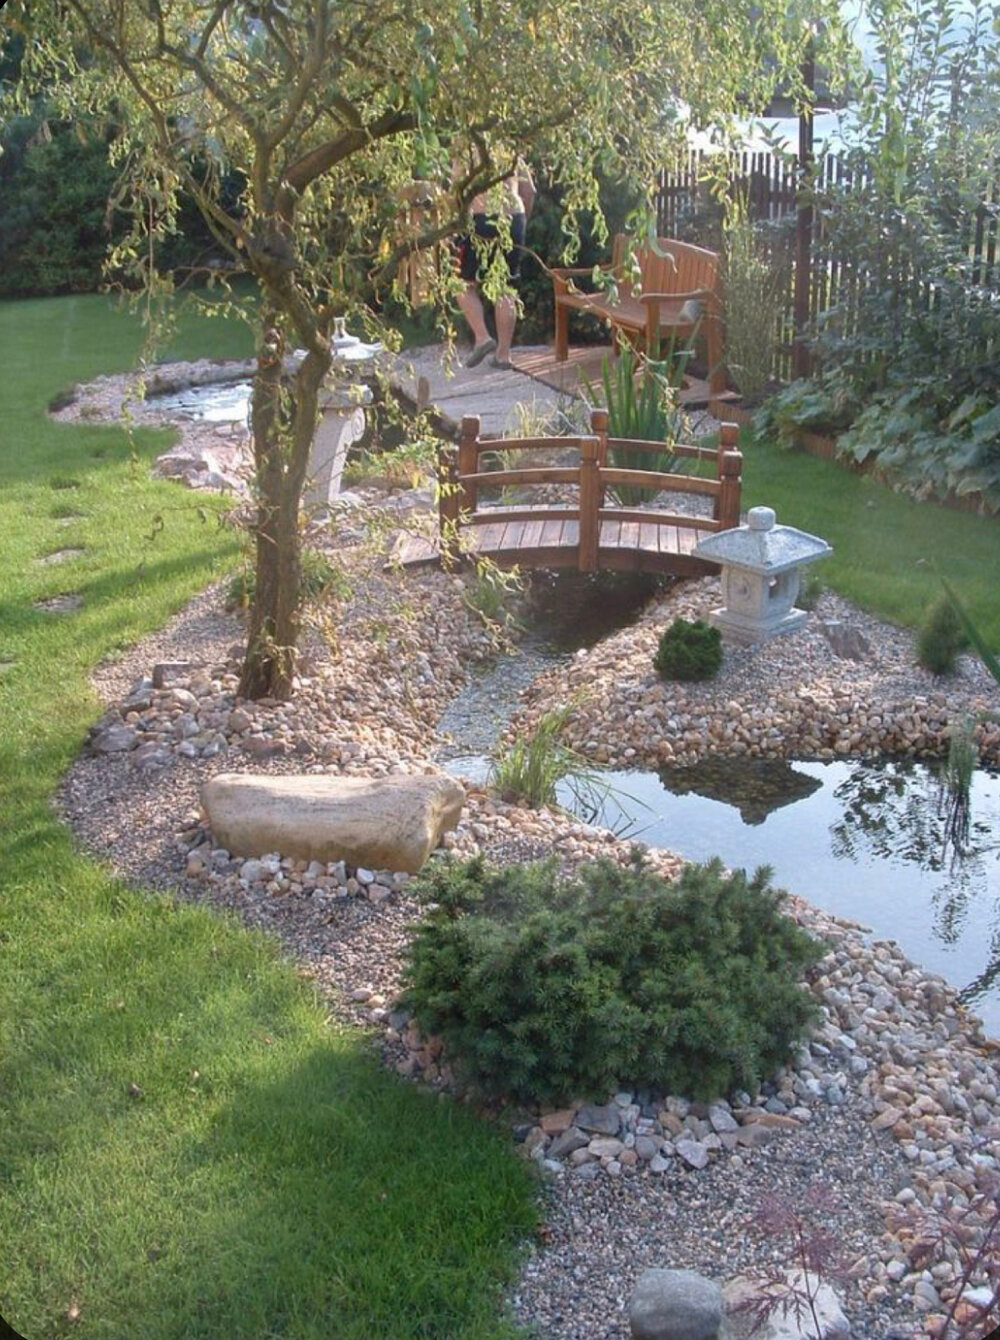 Creating a Tranquil Oasis: The Beauty of Backyard Ponds